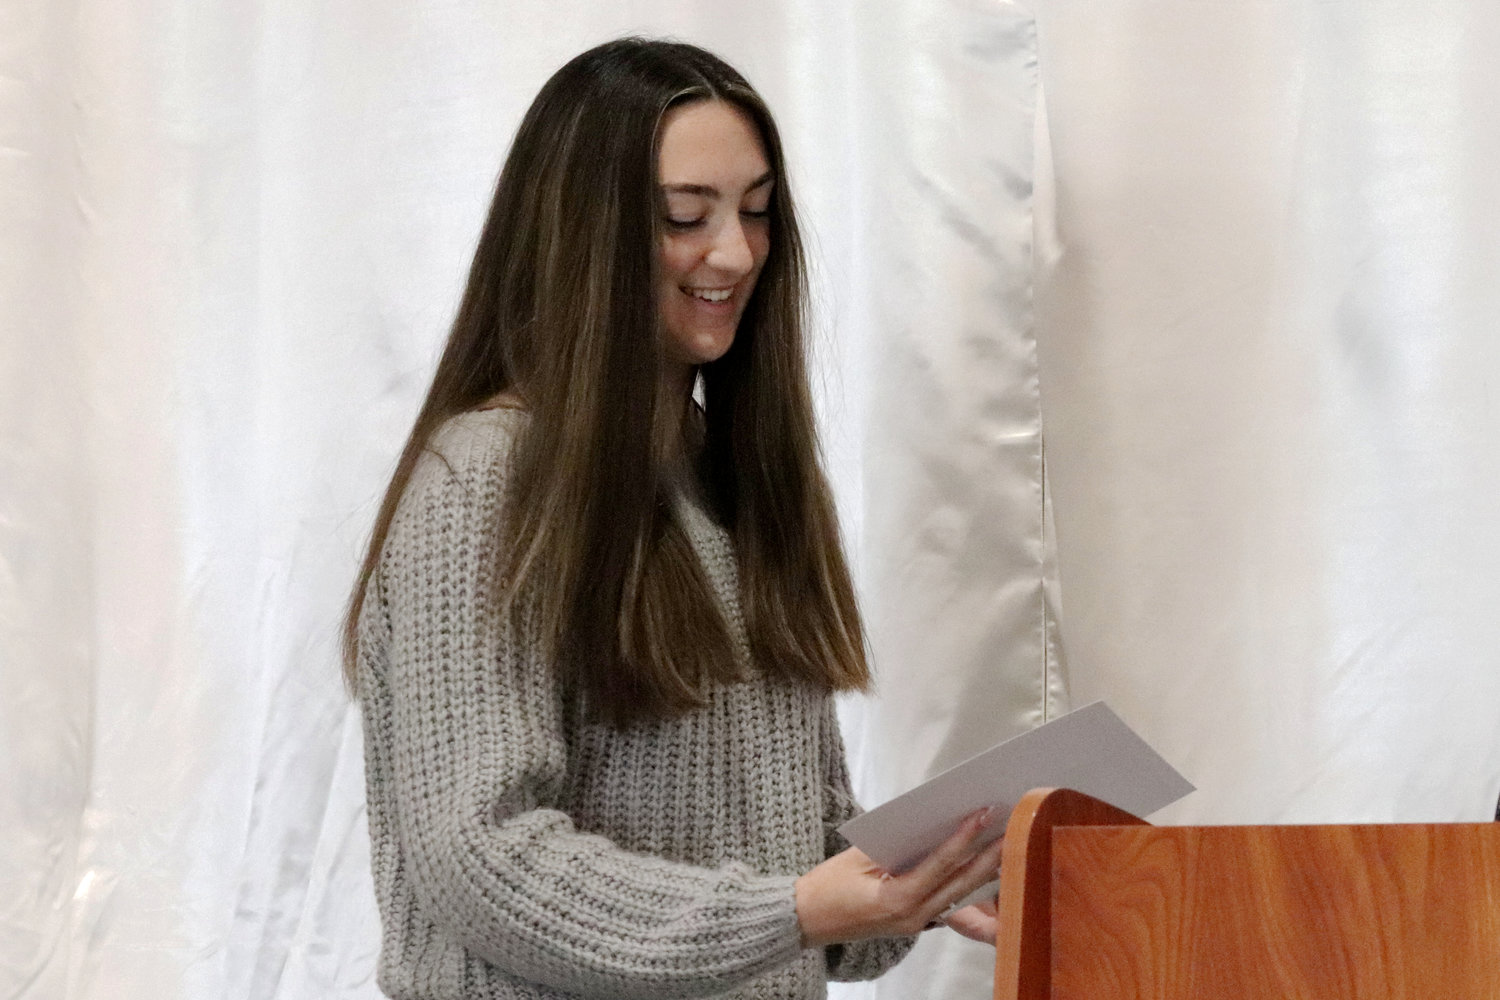 W.F. West senior Claire Kuykendall smiles as she receives a scholarship from Title Guaranty Company of Lewis County during the Rob Fuller Top 25 Scholarship Luncheon in Chehalis on Monday.